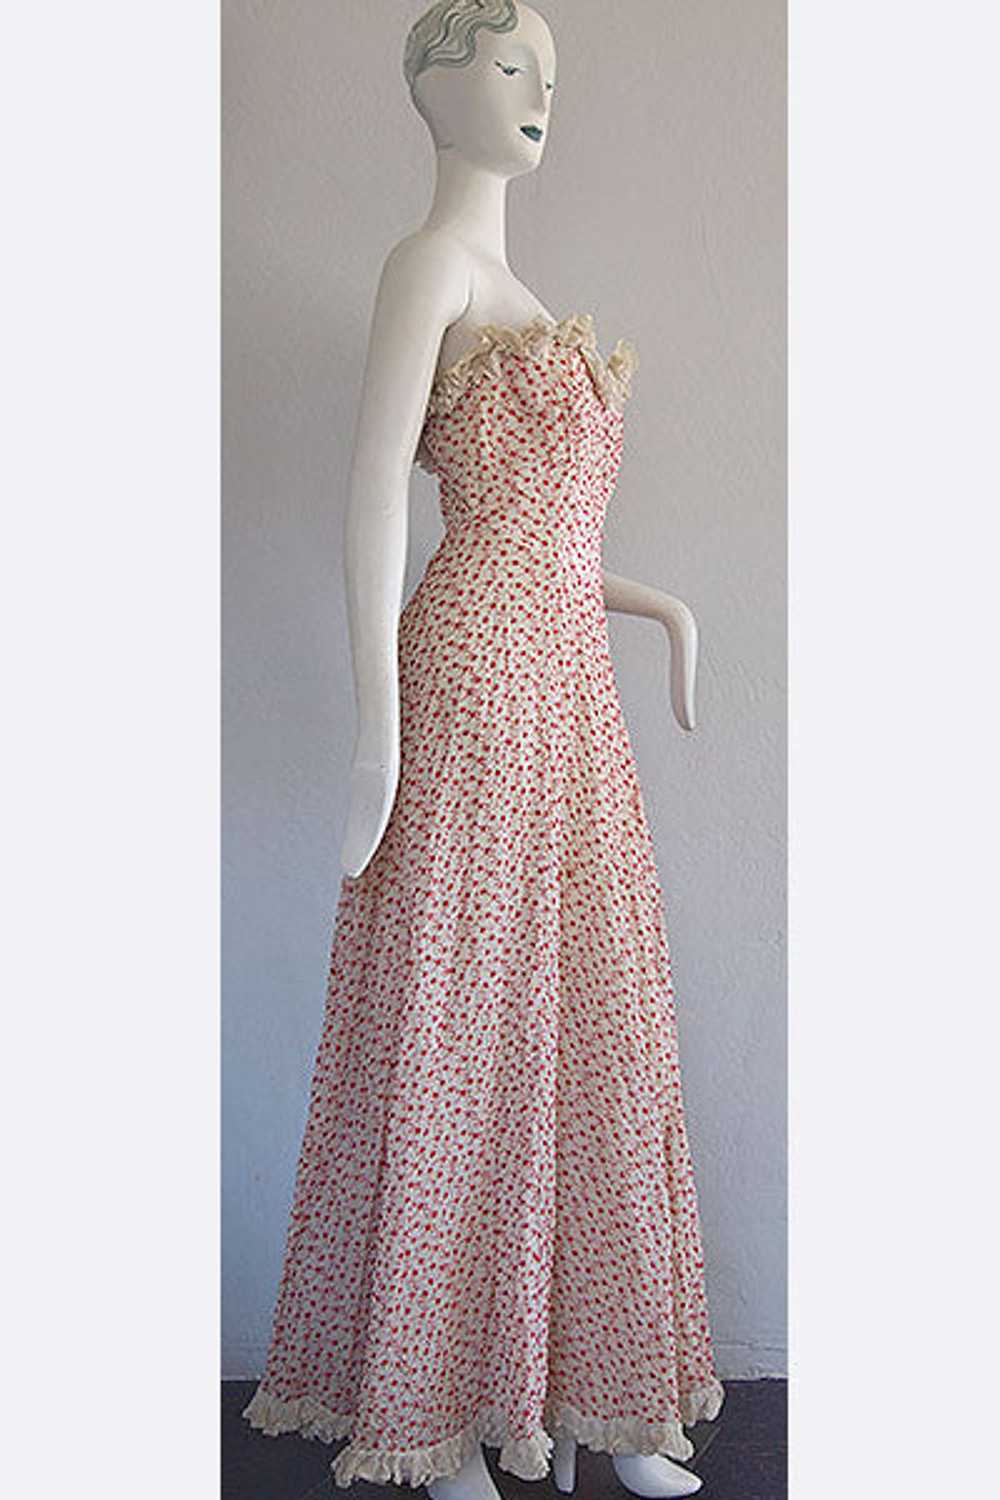 1940s Embroidered Party Dress - image 3